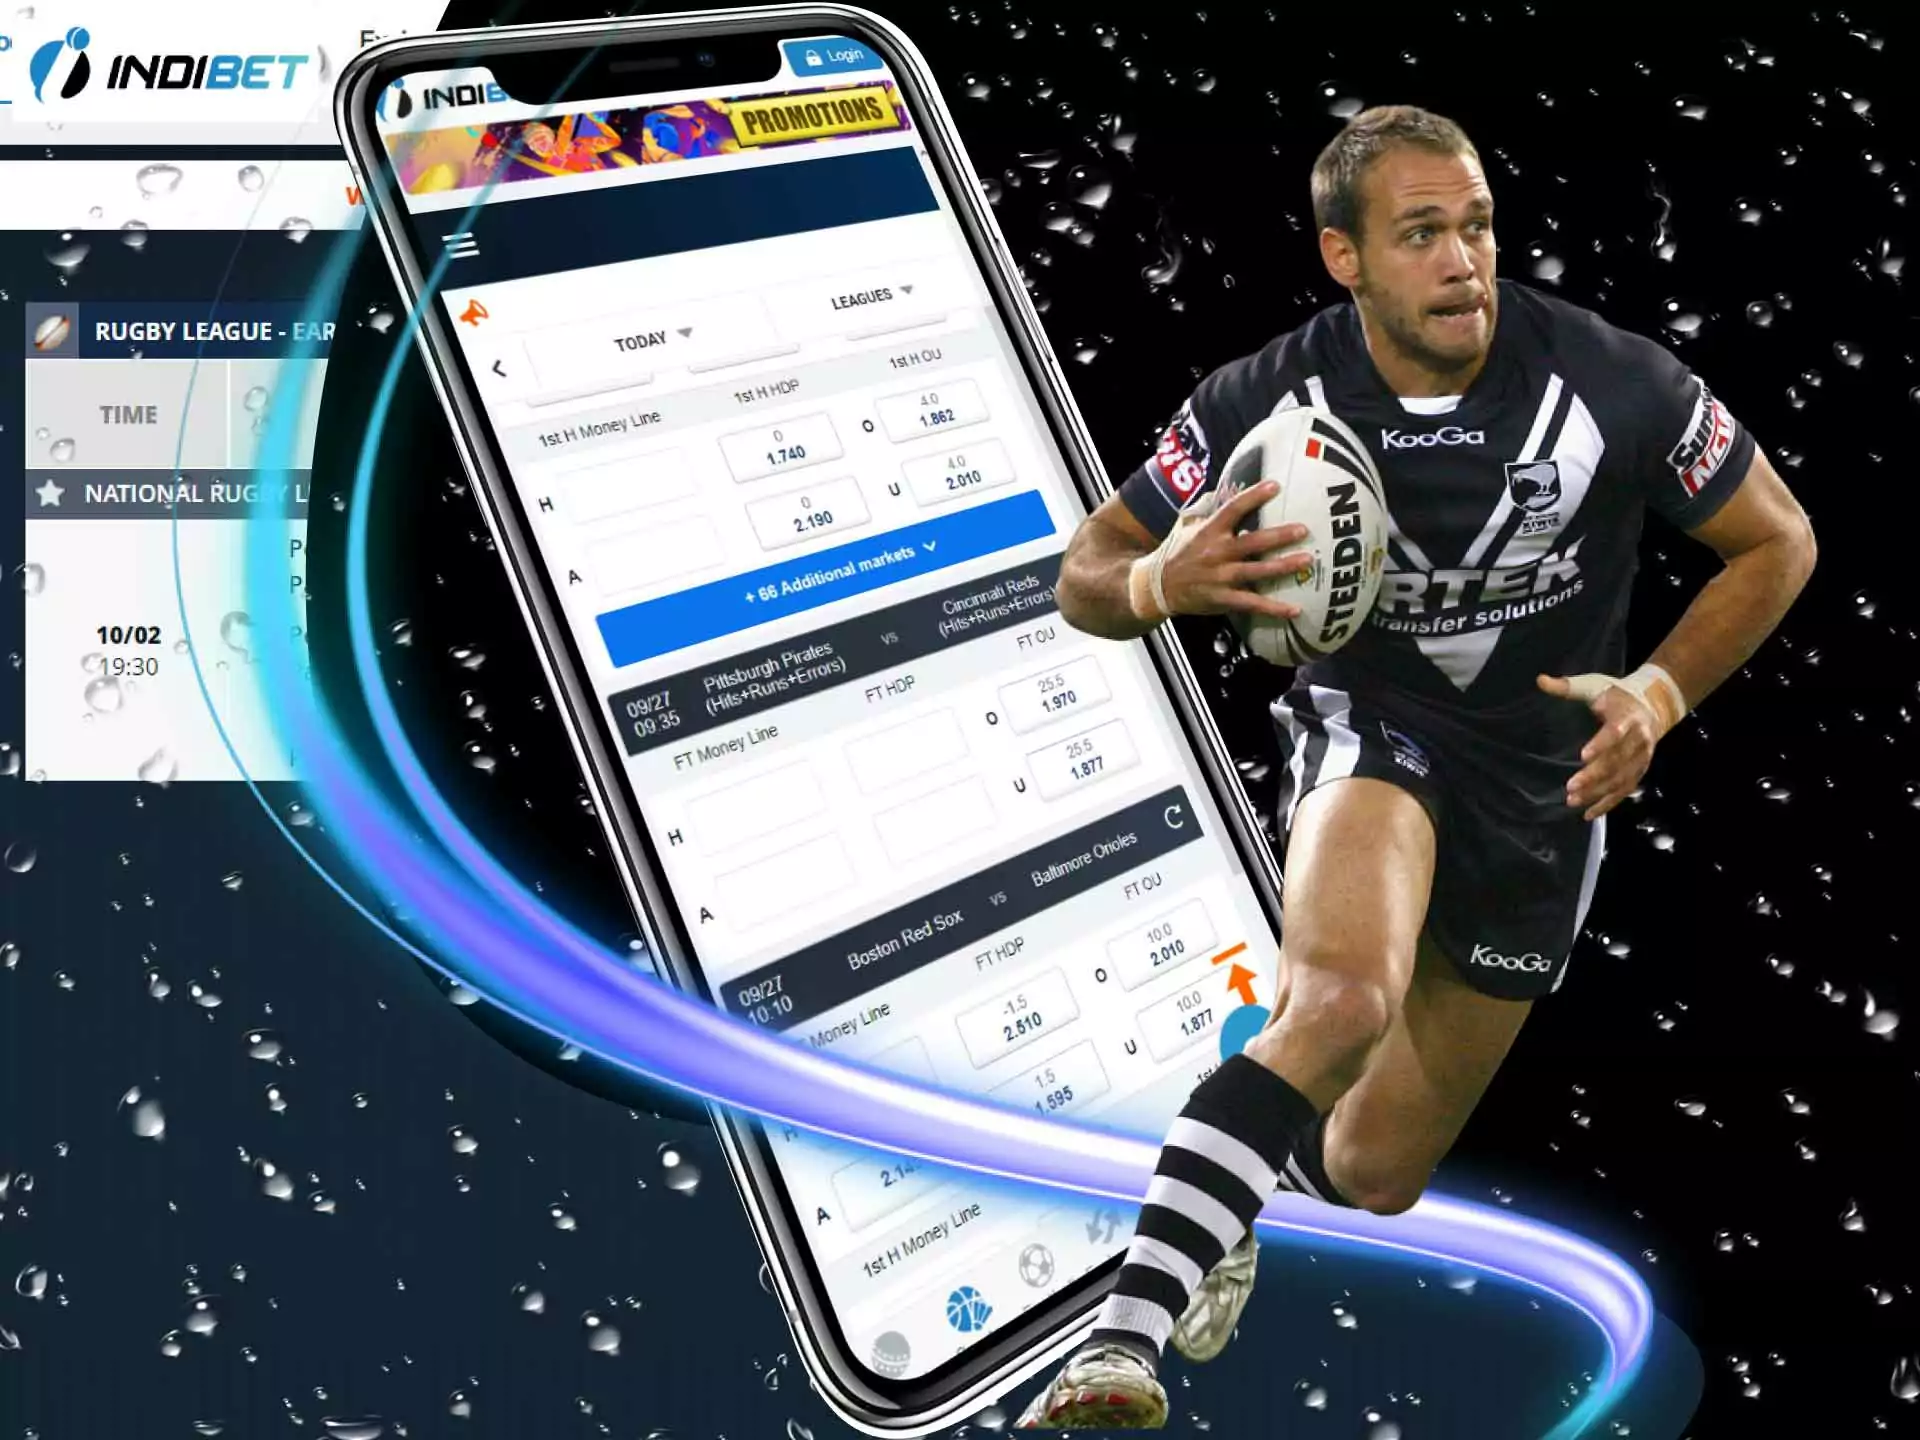 Place bets on the rugby matches in the Indibet mobile app.